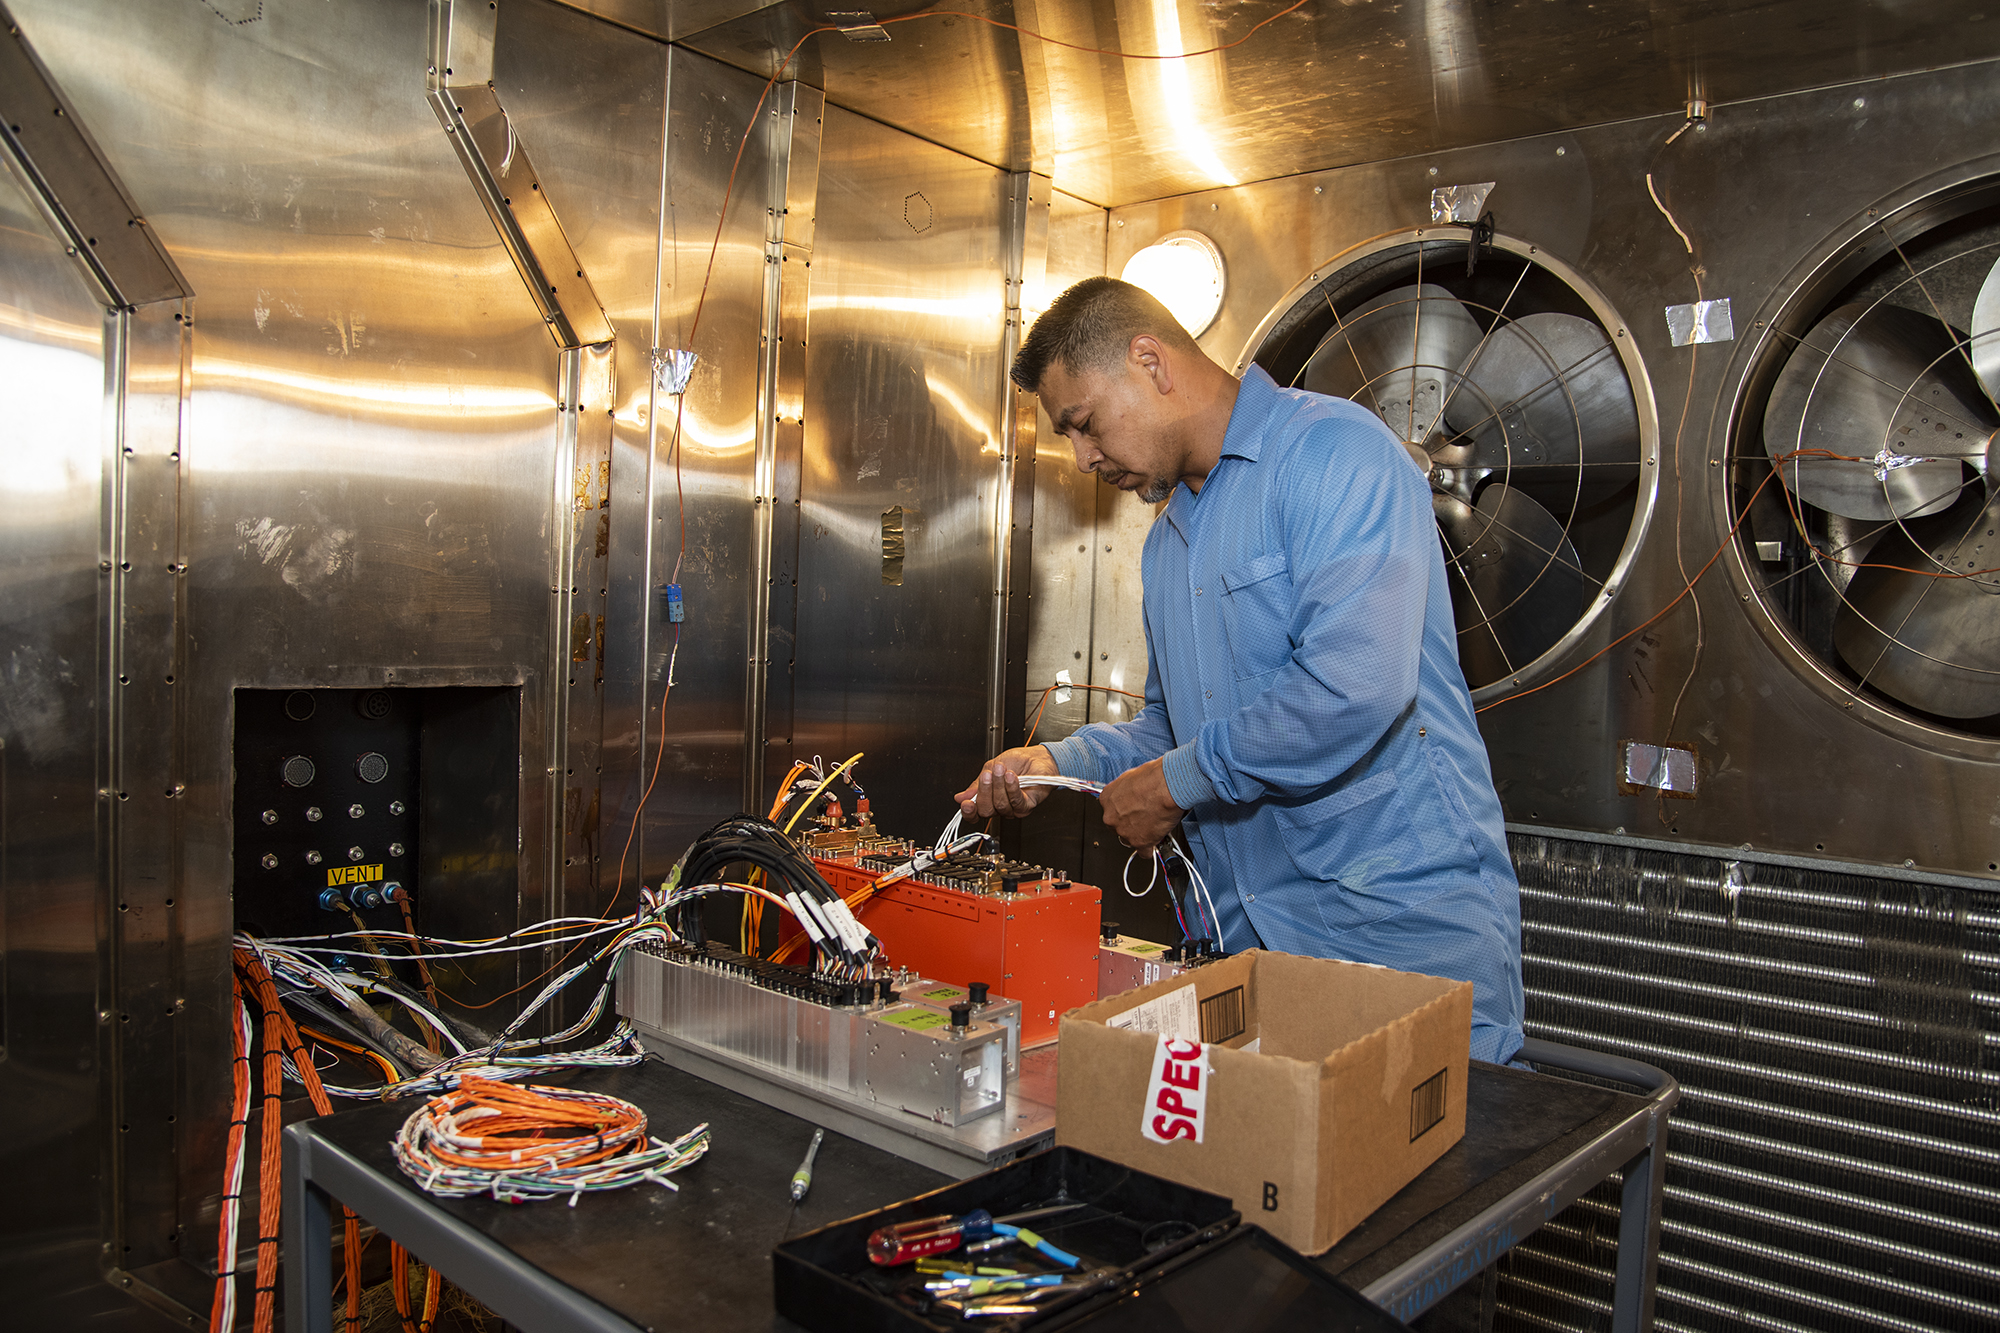 Angelo De La Rosa works inside the Environmental Laboratory’s thermal chamber to attach test articles.